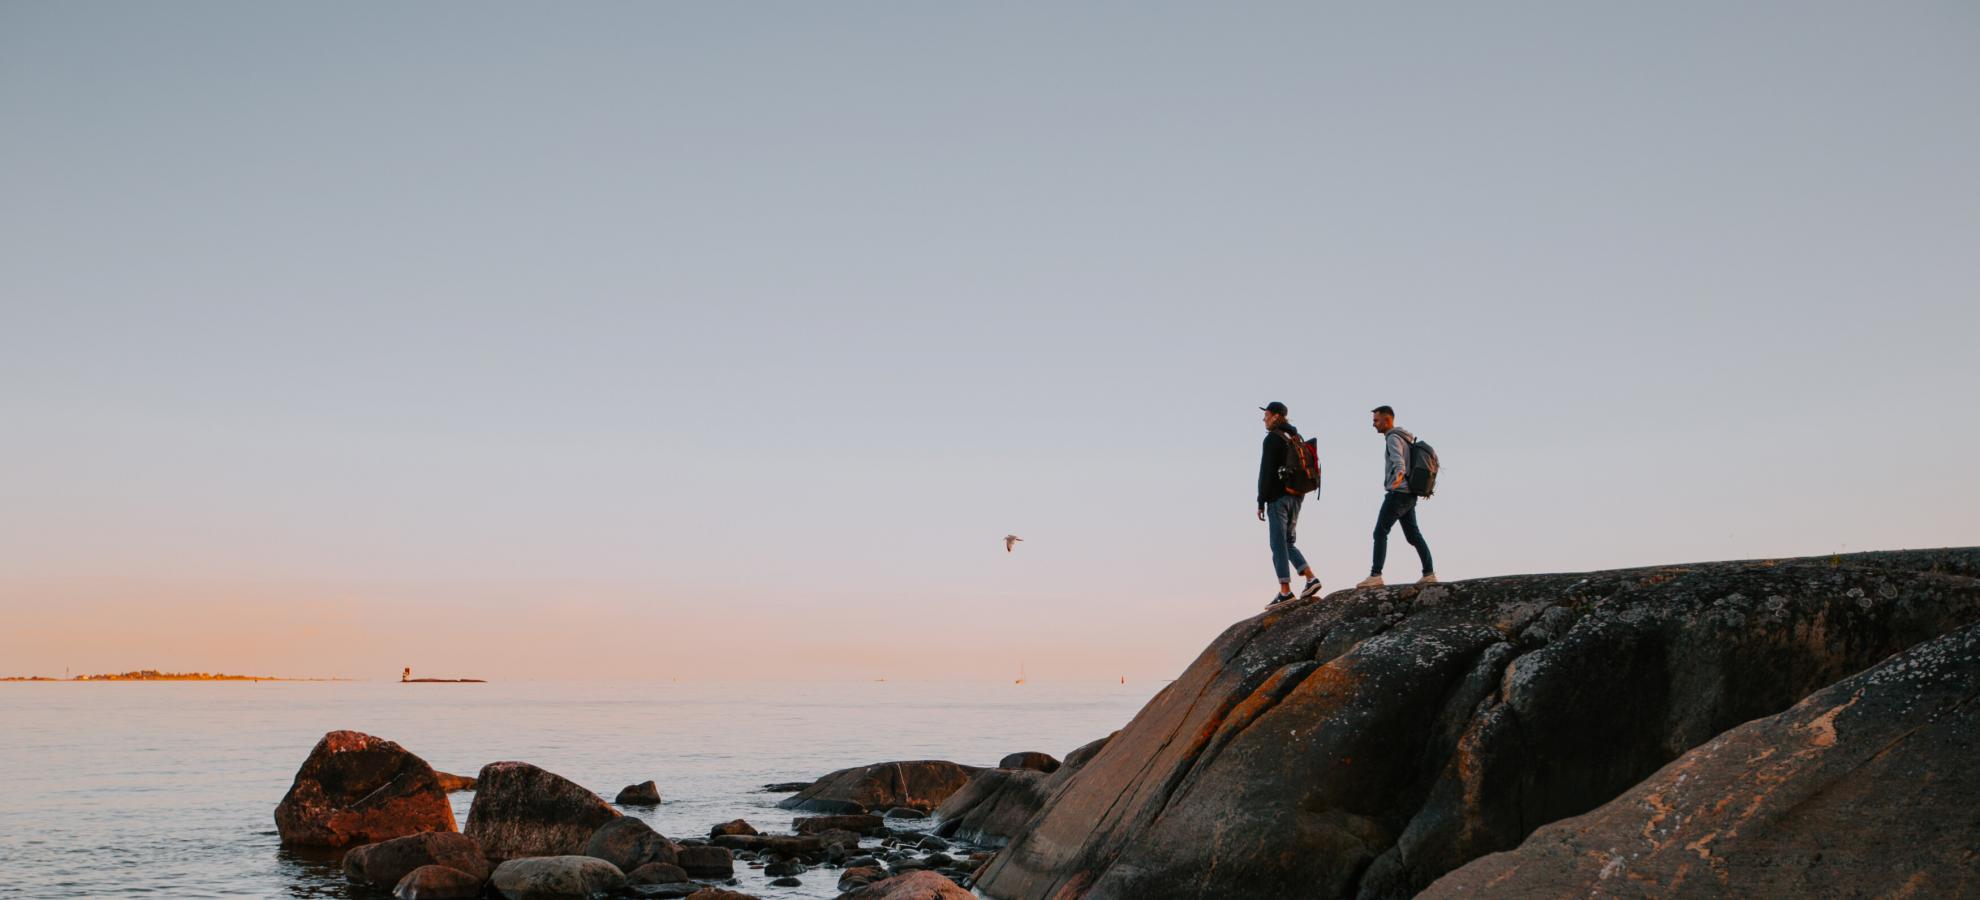 Towards the right of the picture, two men walk to the edge of some tall rocks on Pihlajsaari island and look out towards the sea at dusk.